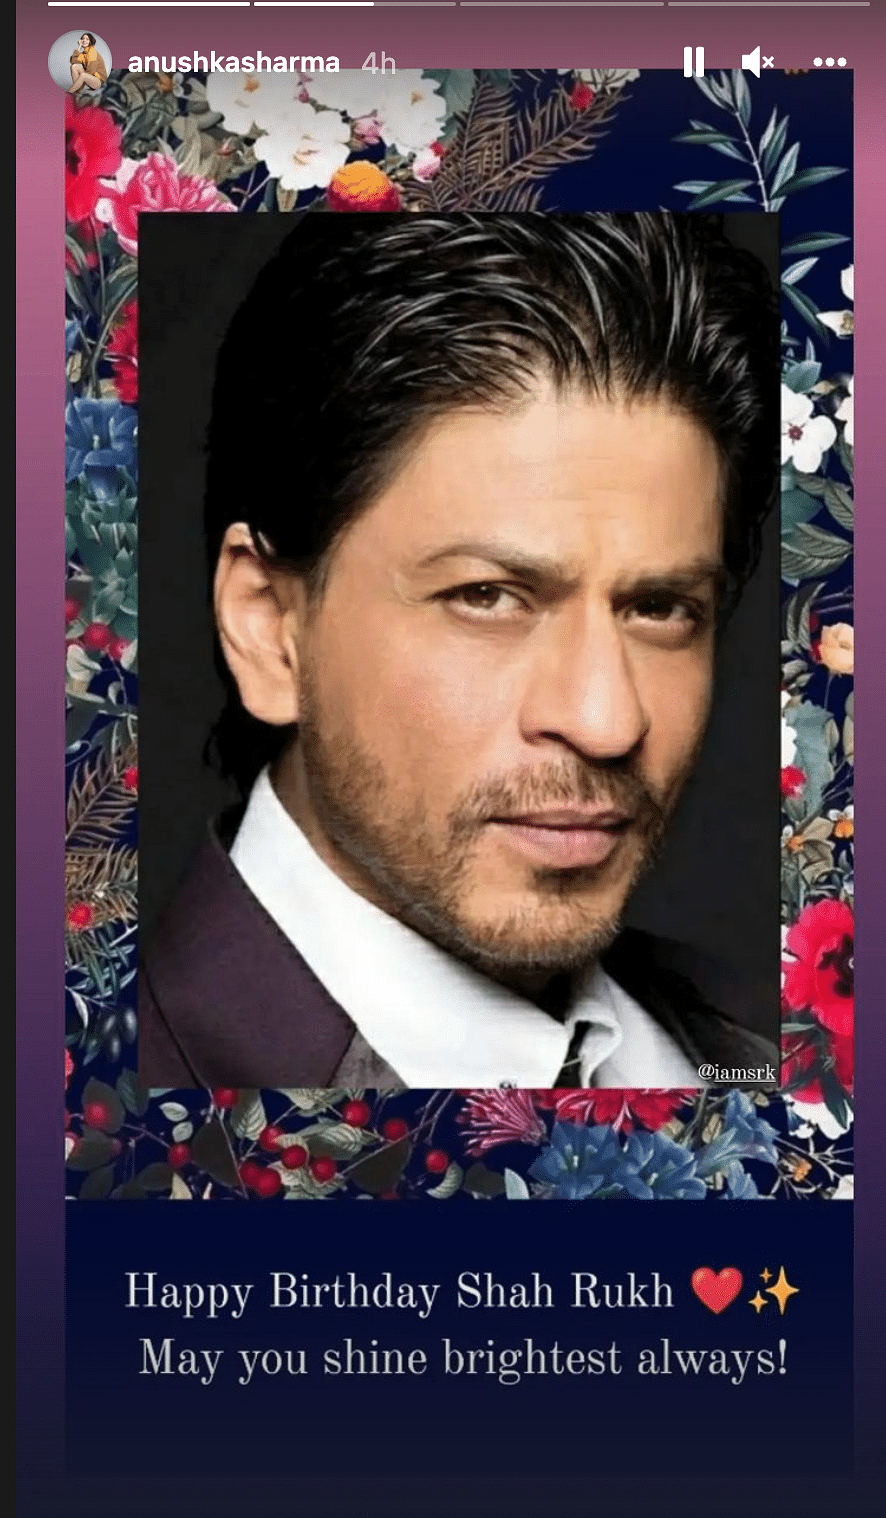 On Shah Rukh Khan's birthday, wishes are pouring in from the industry.